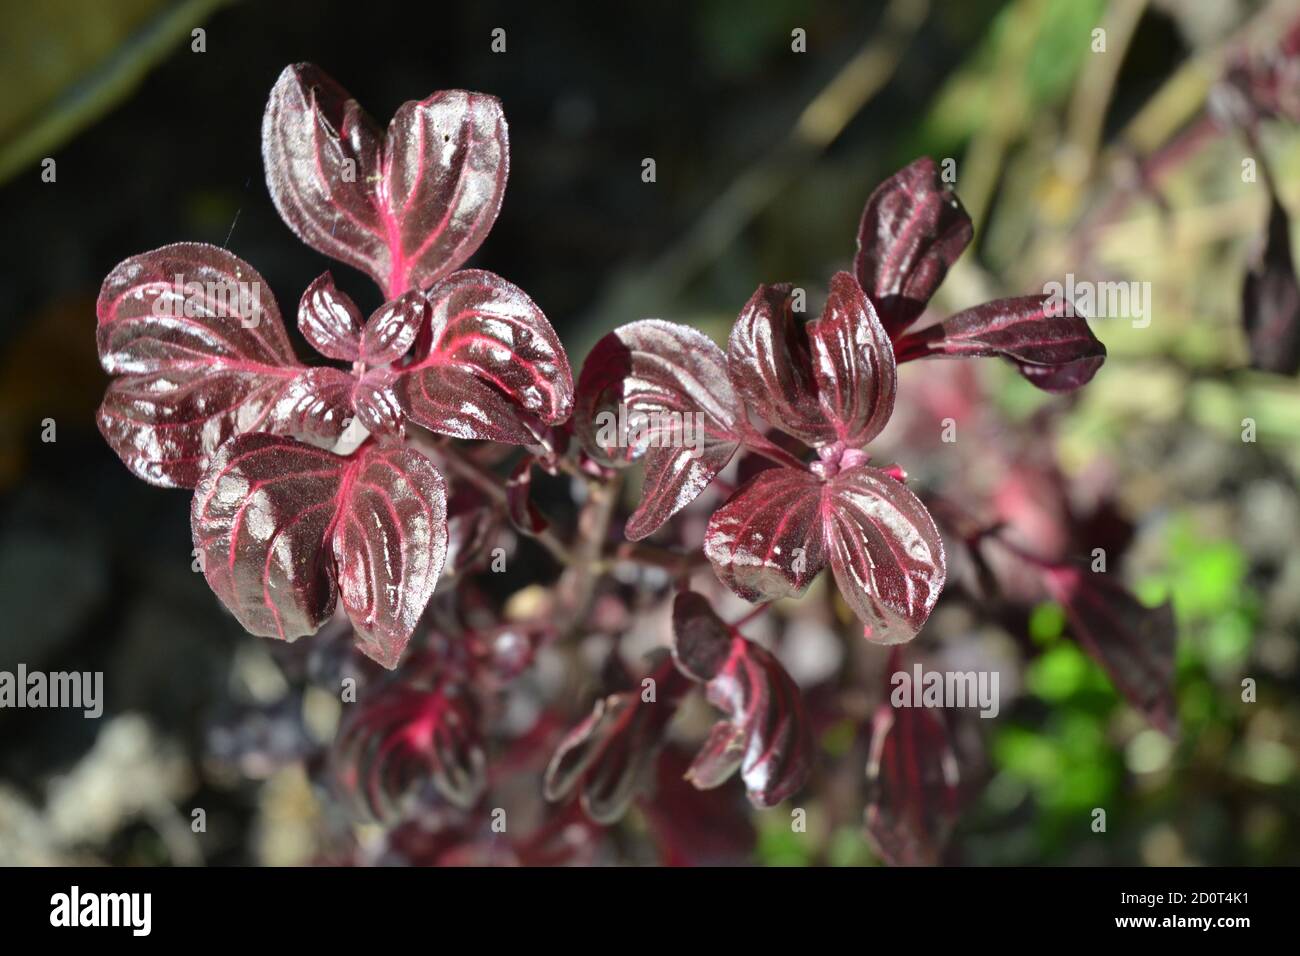 plants with brown and red leaves in the garden. Stock Photo